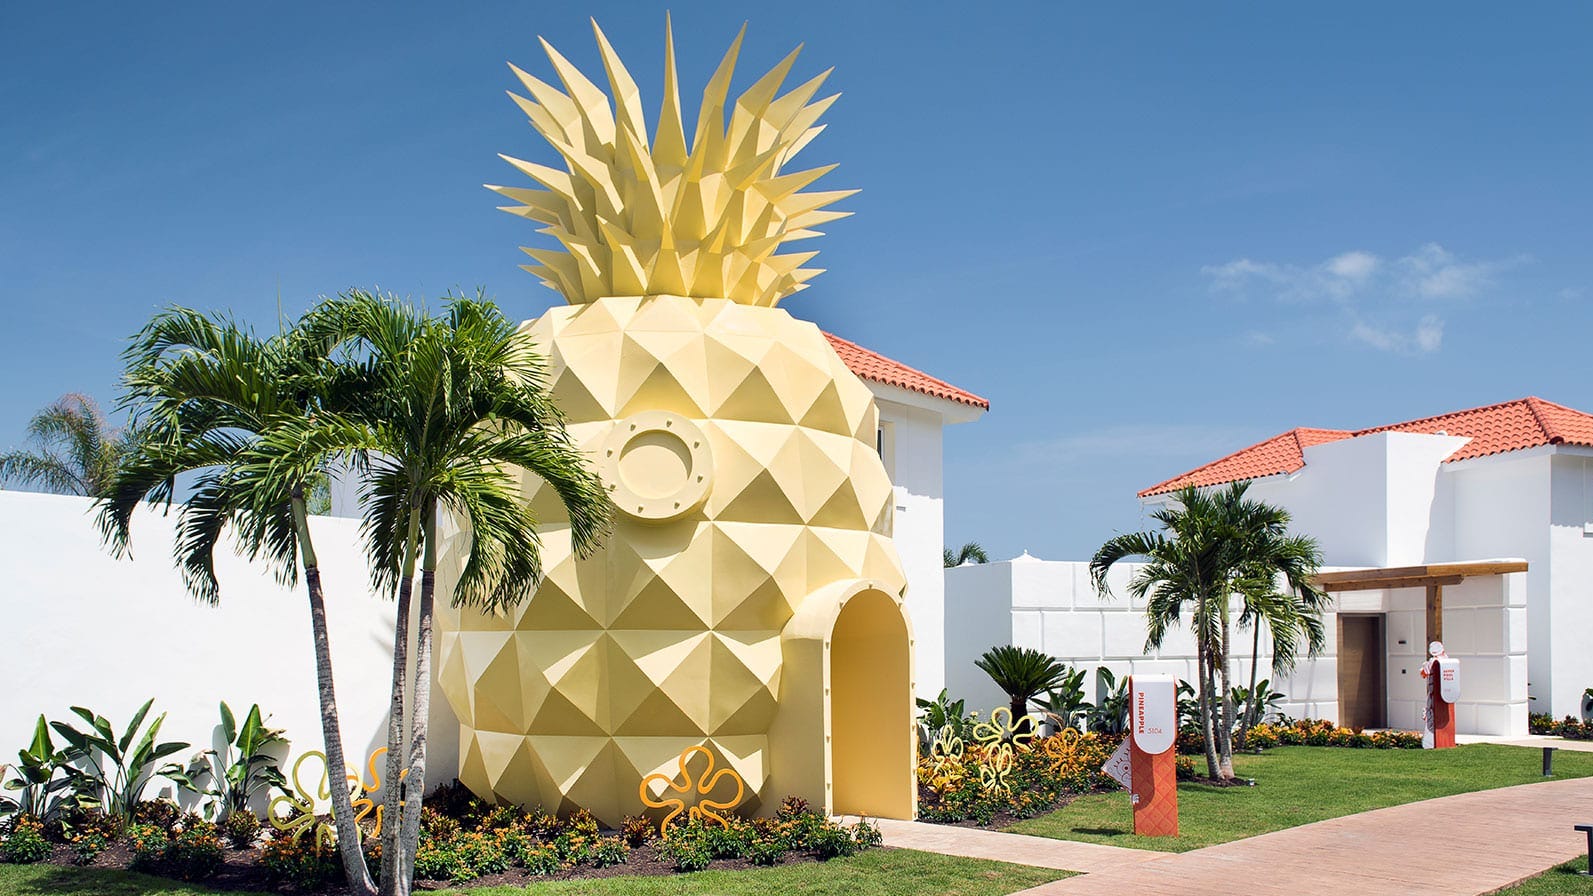 Who lives in a pineapple under the sea?  You, when you stay in the 